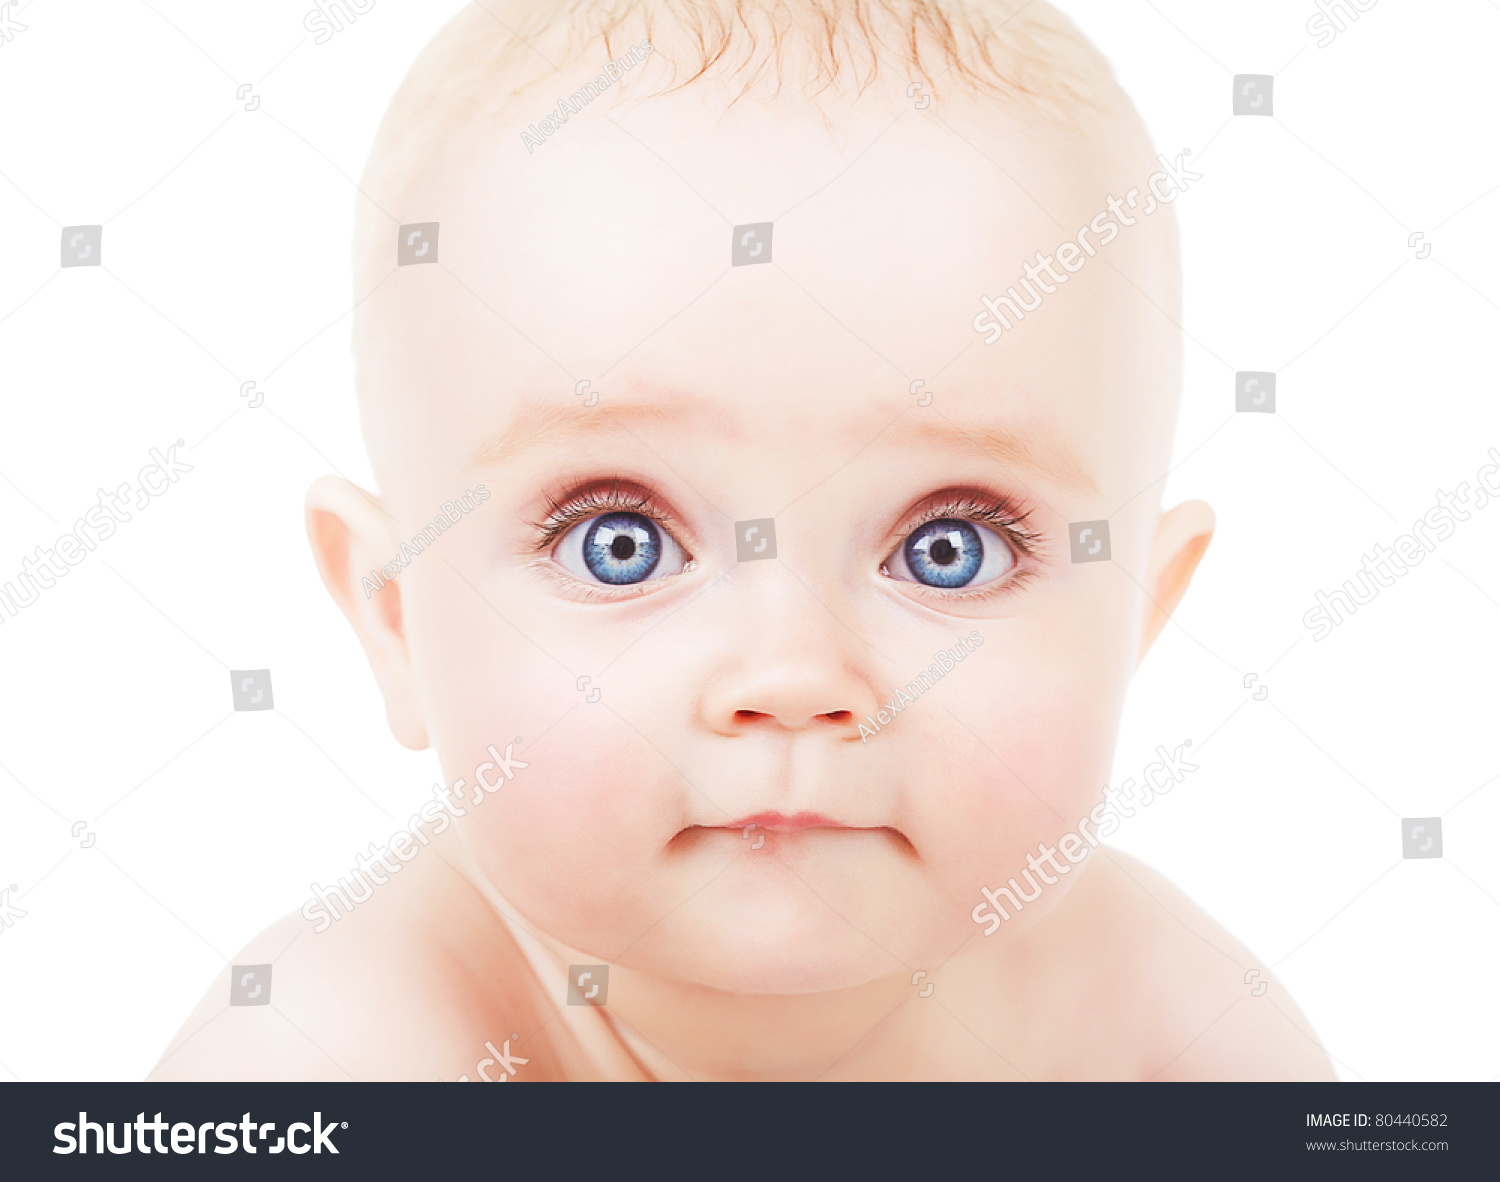 Cute Baby With Blue Eyes Stock Photo 80440582 : Shutterstock